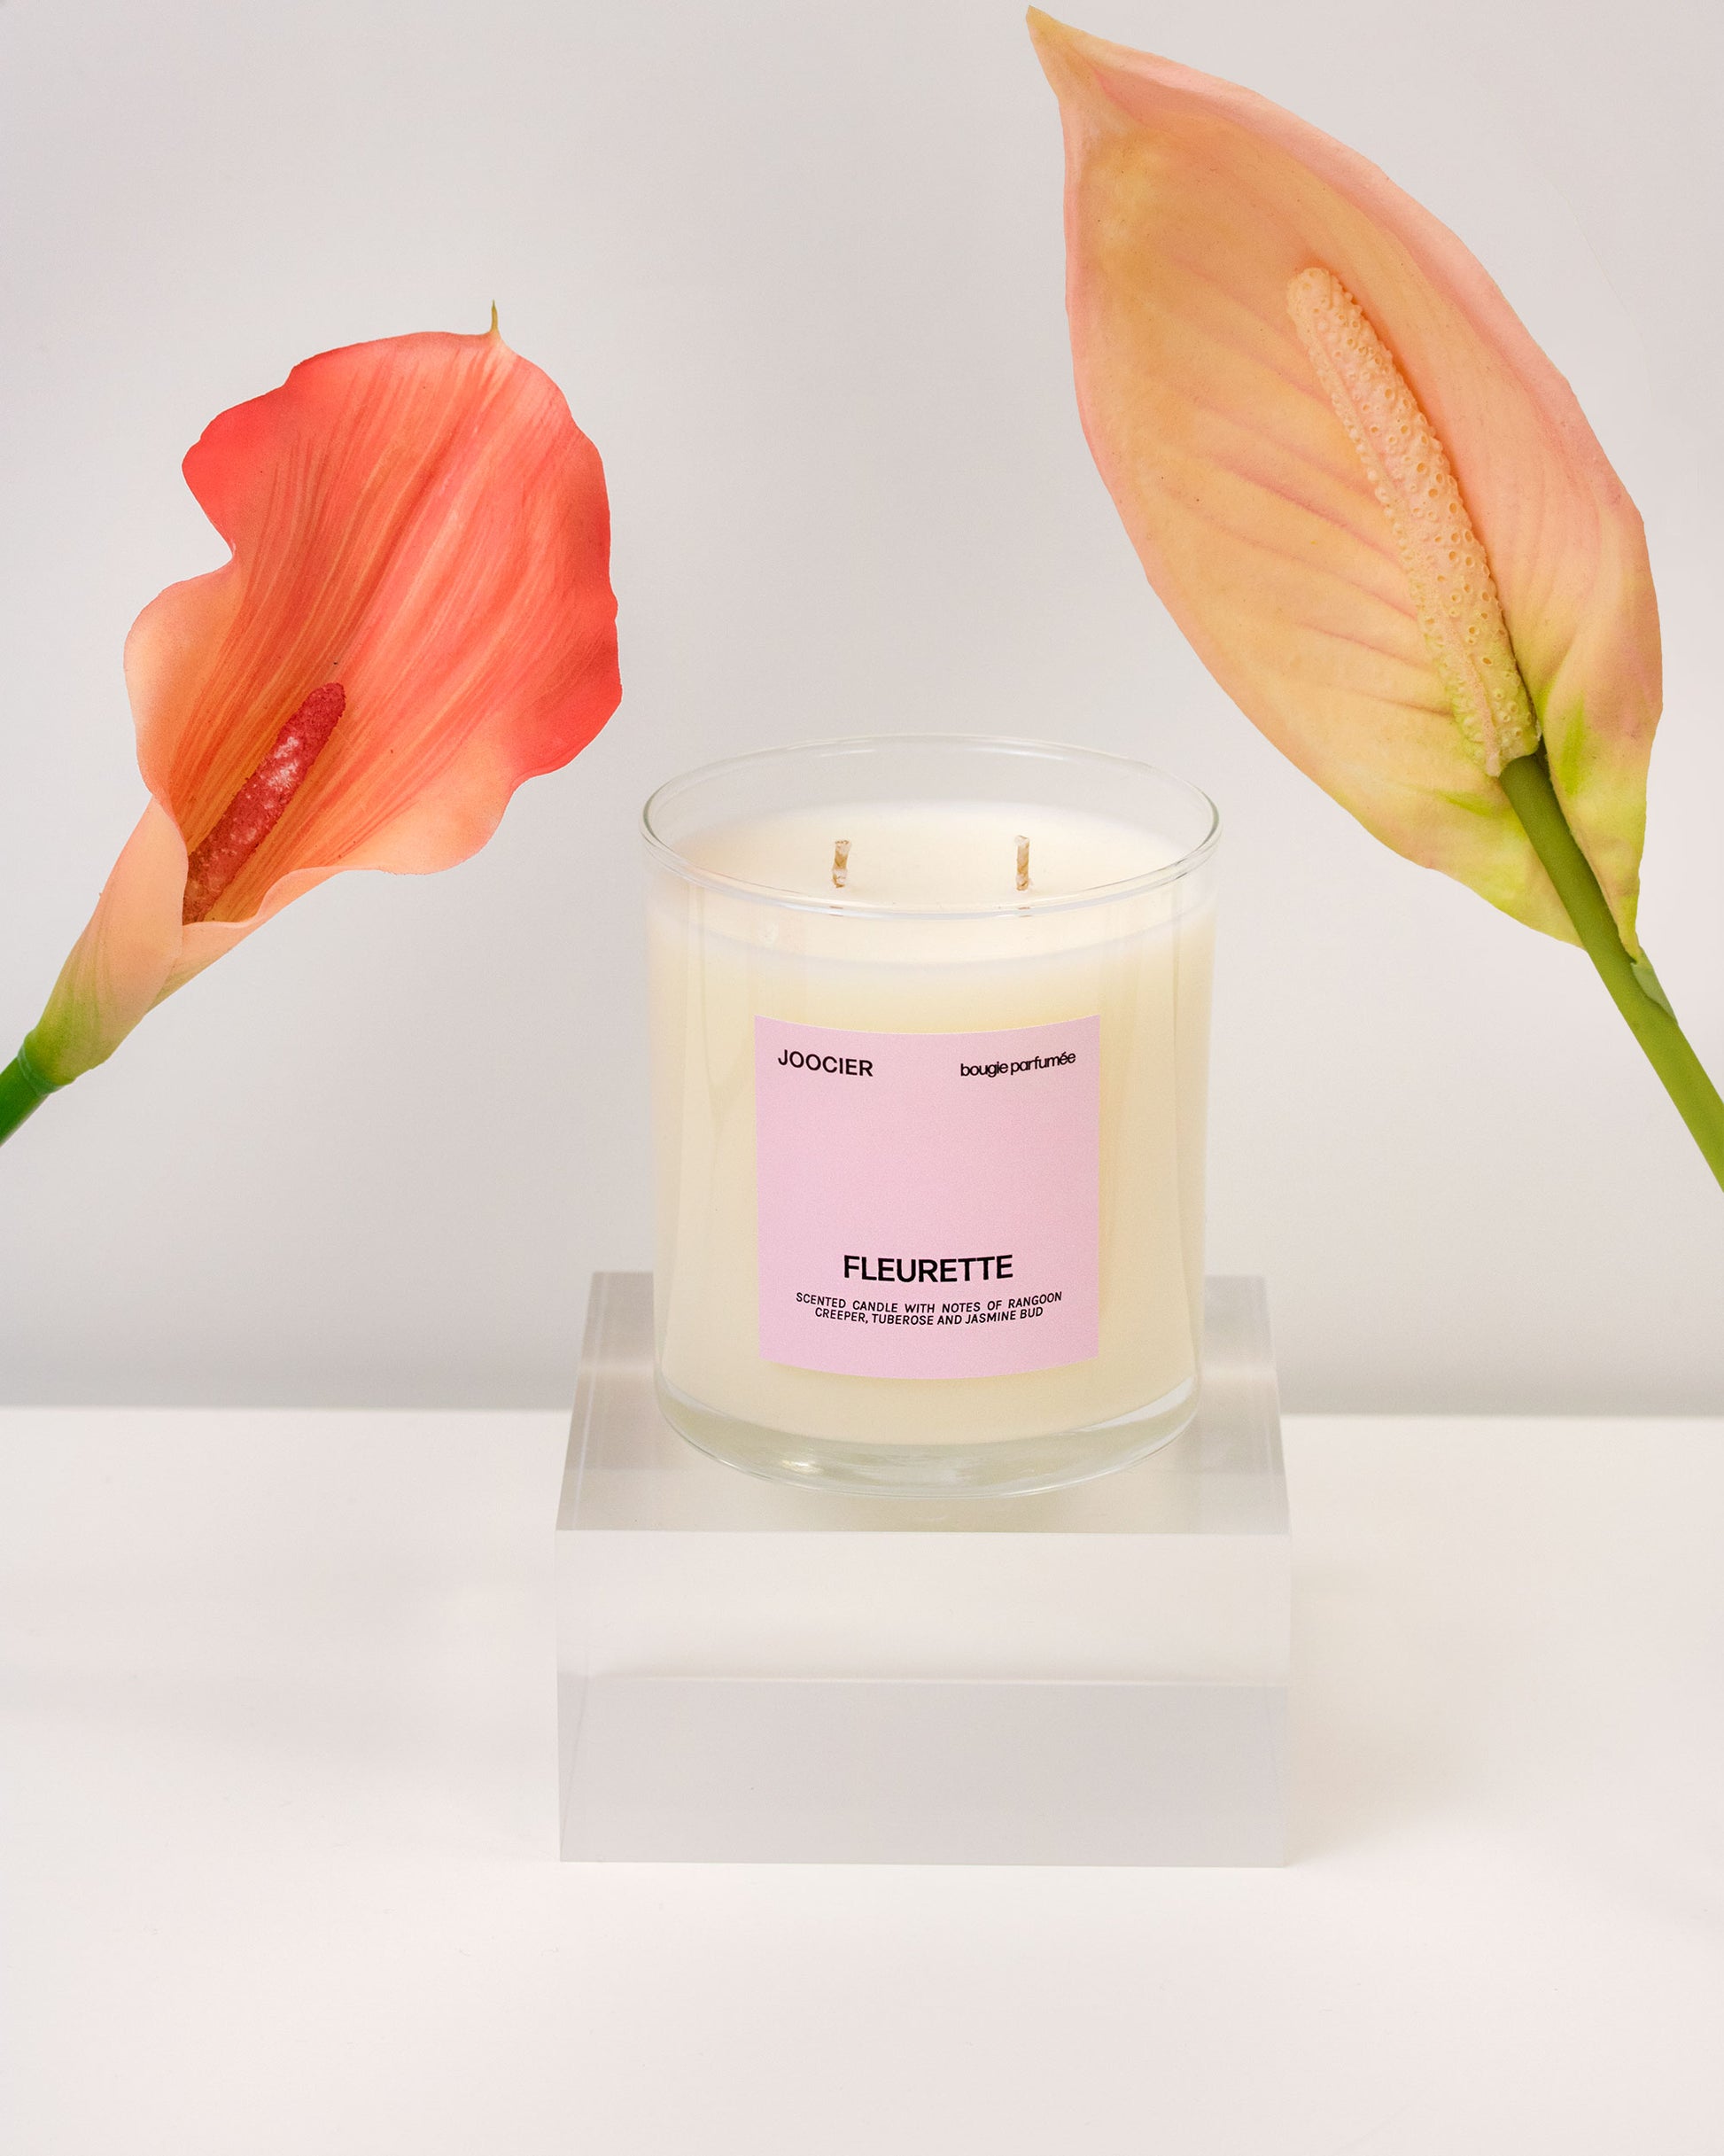 Candle inspired by Gucci Bloom perfume